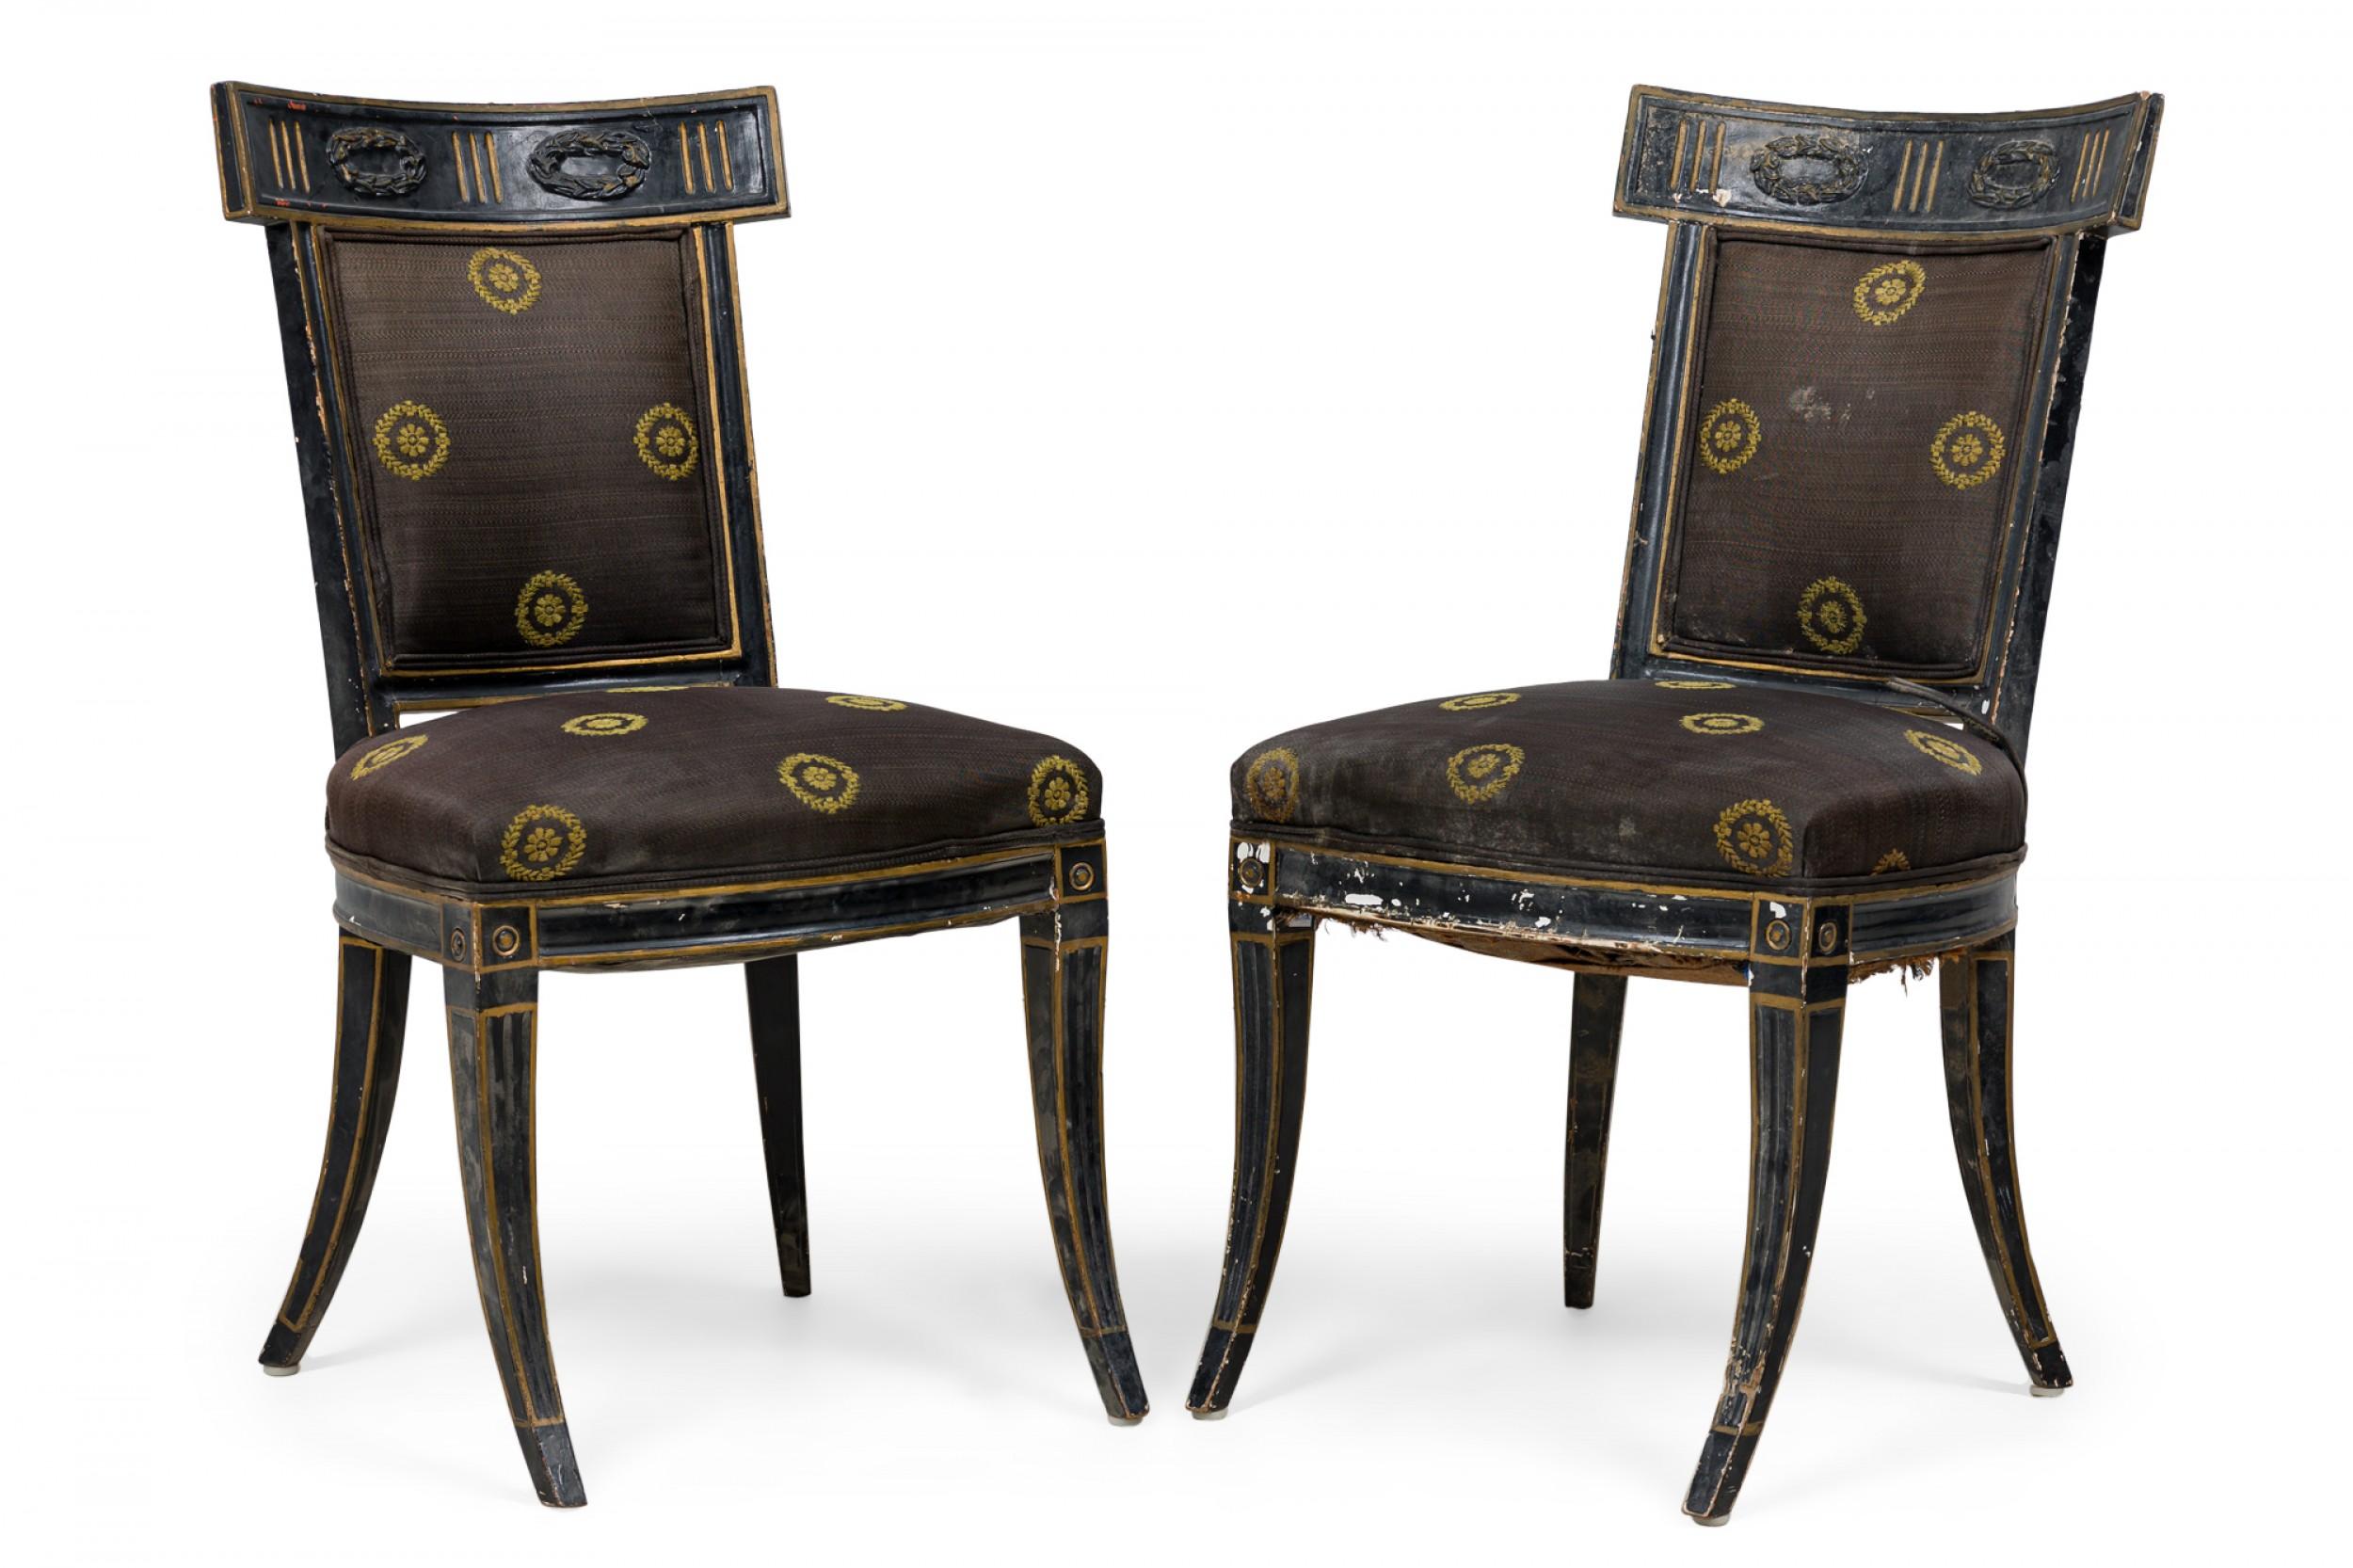 Pair of Italian Neo-Classic (18th Century) black painted side chairs with curved backs and rectangular tops carved in a two-wreathed swag reserve, trimmed and highlighted in gold, the back and seat upholstered in black fabric interspersed with